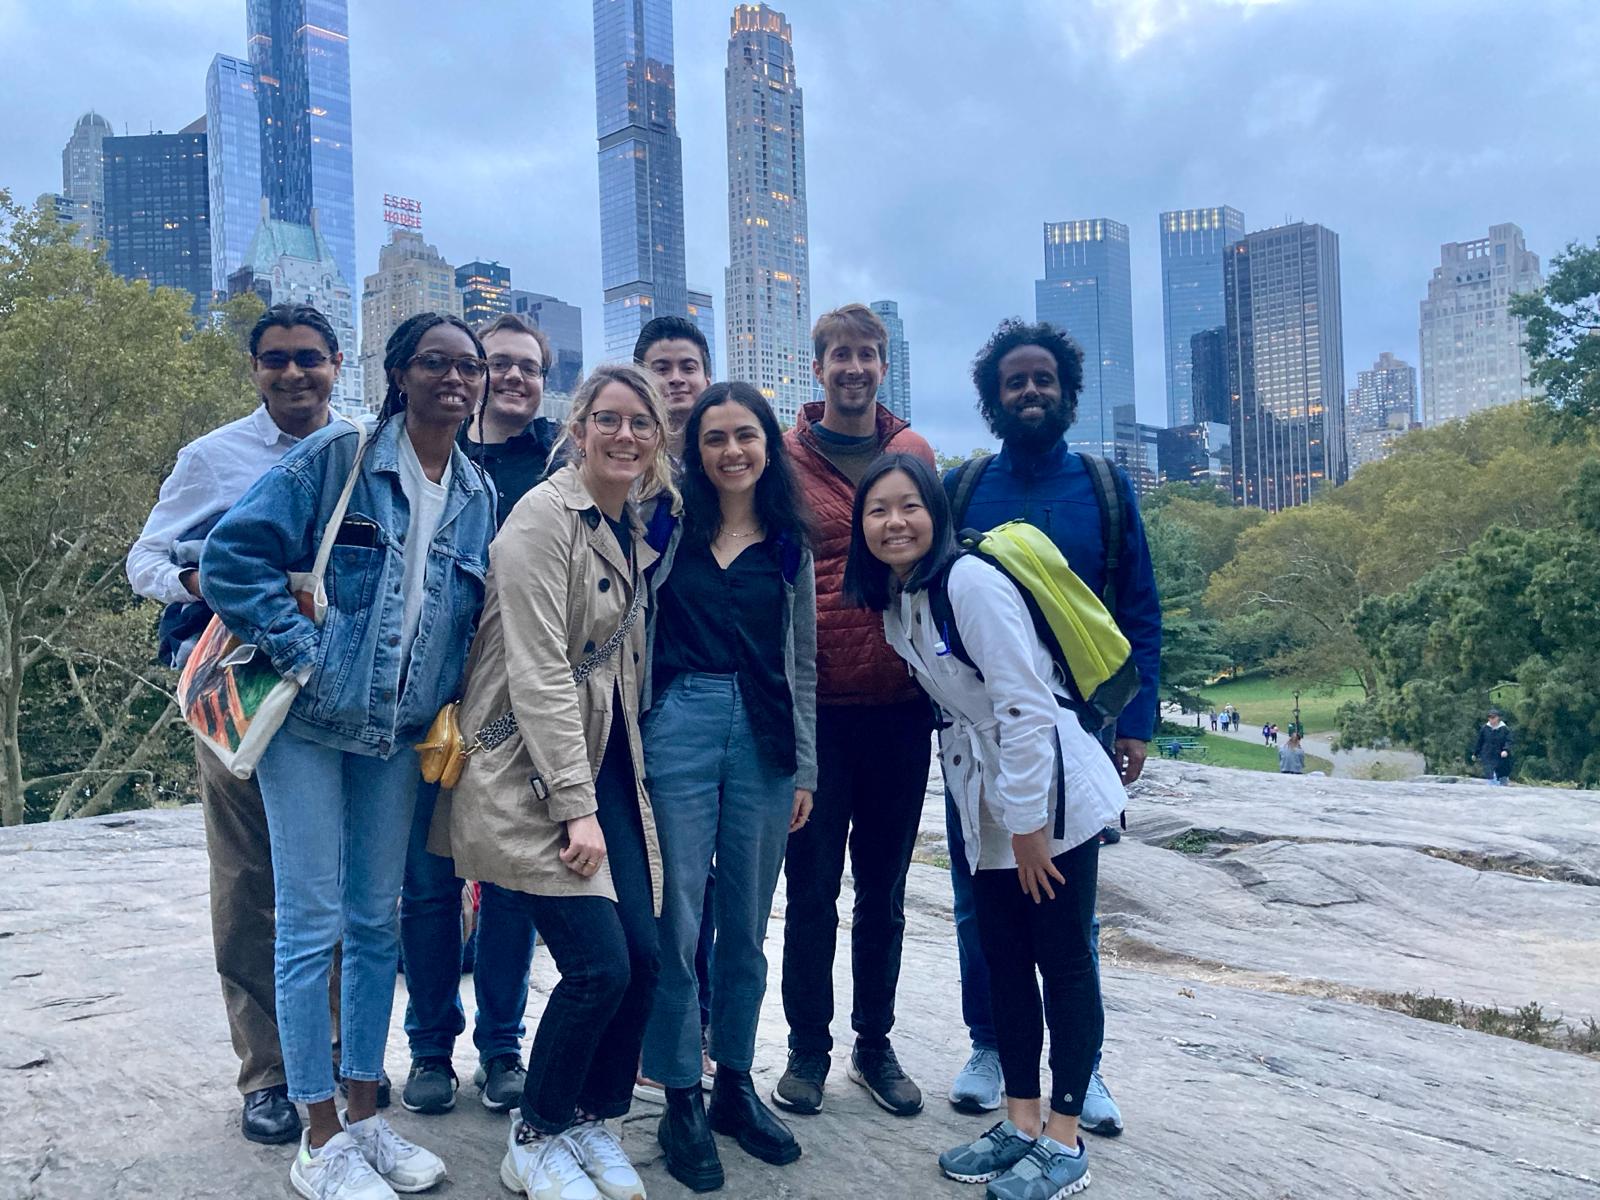 Group posing with the Manhattan skyline in the background.